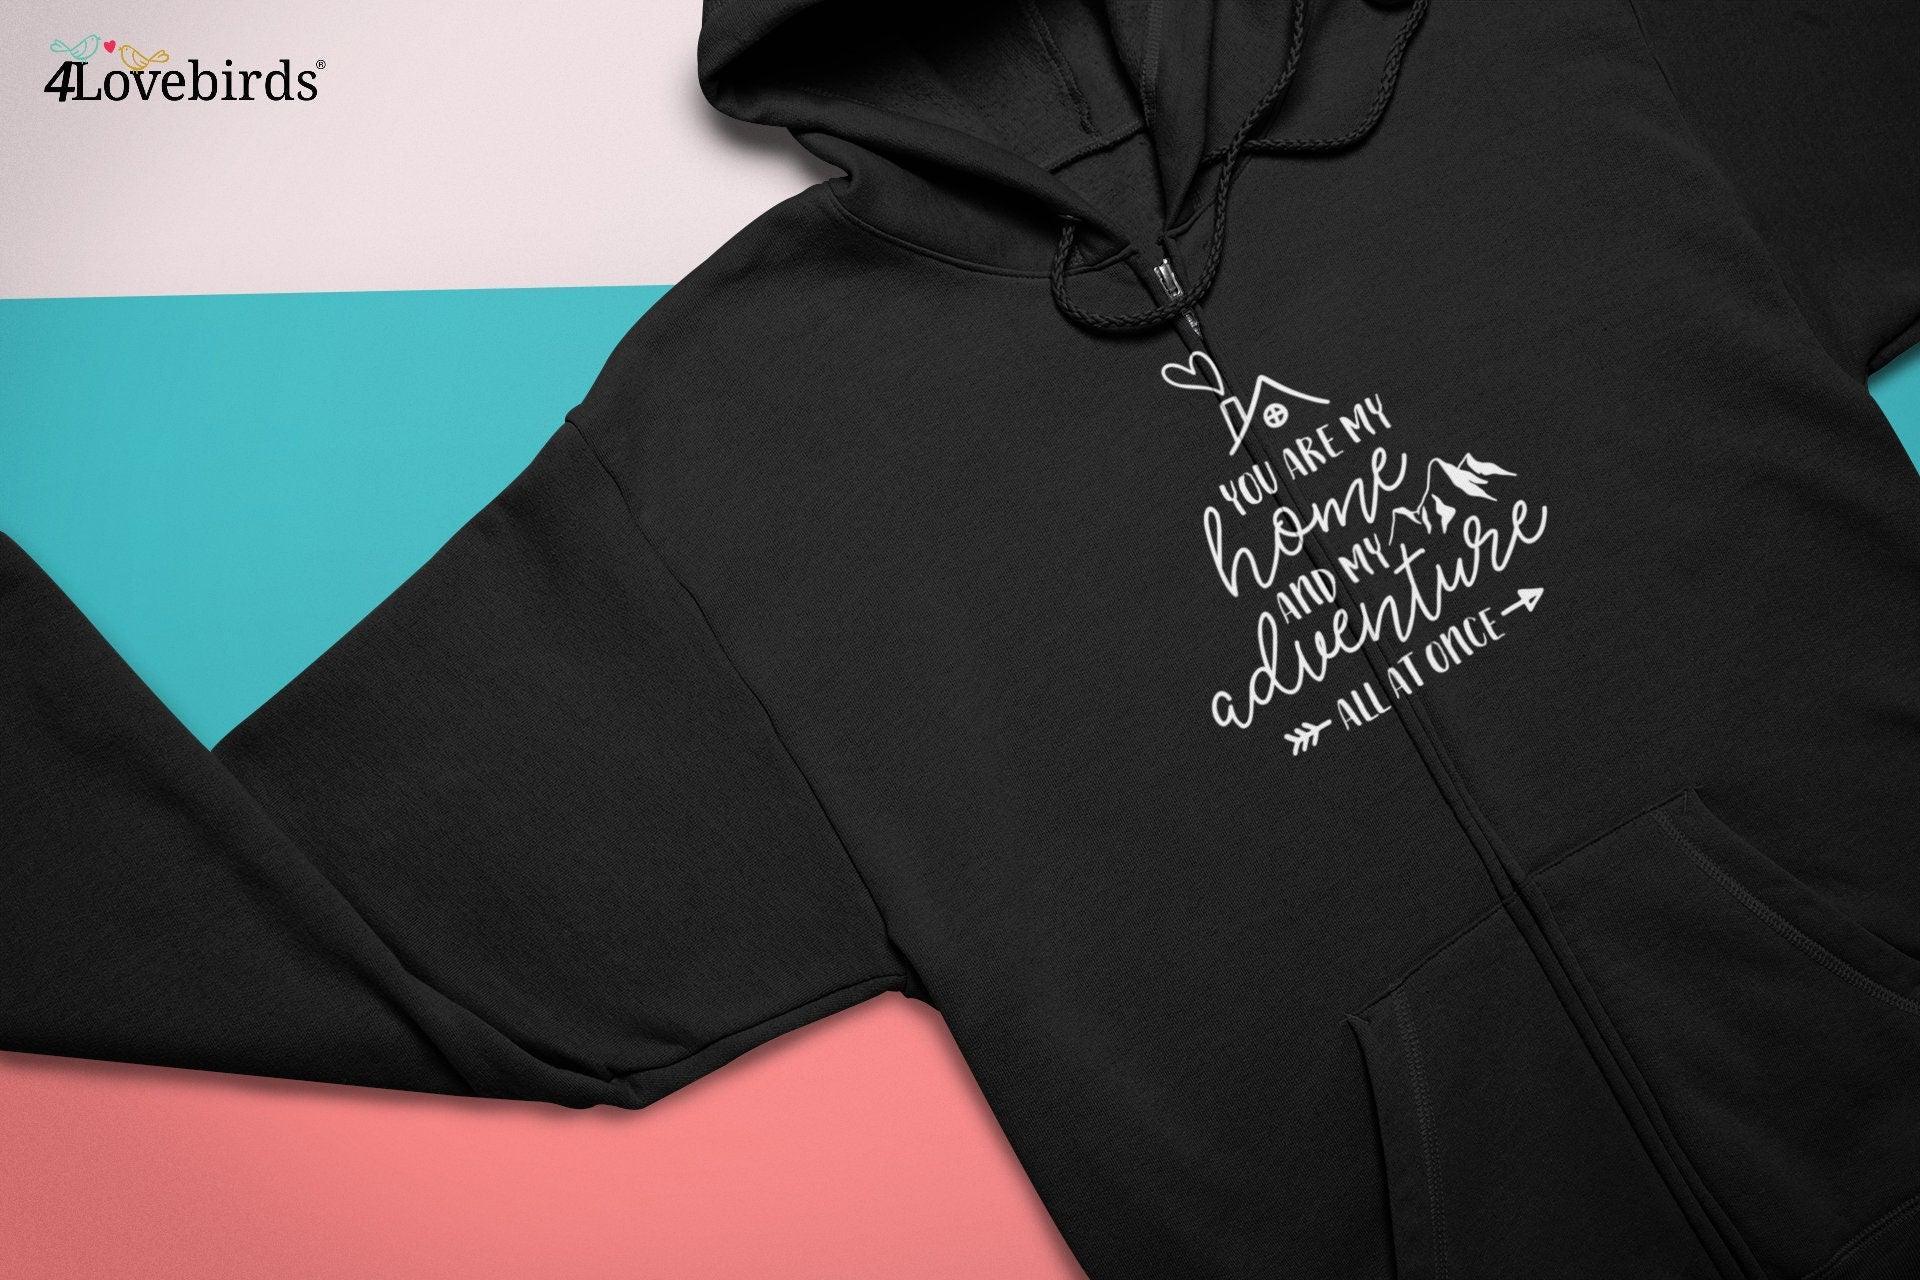 You Are My Home and My Adventure all at once Hoodie, Lovers matching T-shirt, Gift for Couples, Valentine Sweatshirt, Cute Couple Longsleeve - 4Lovebirds